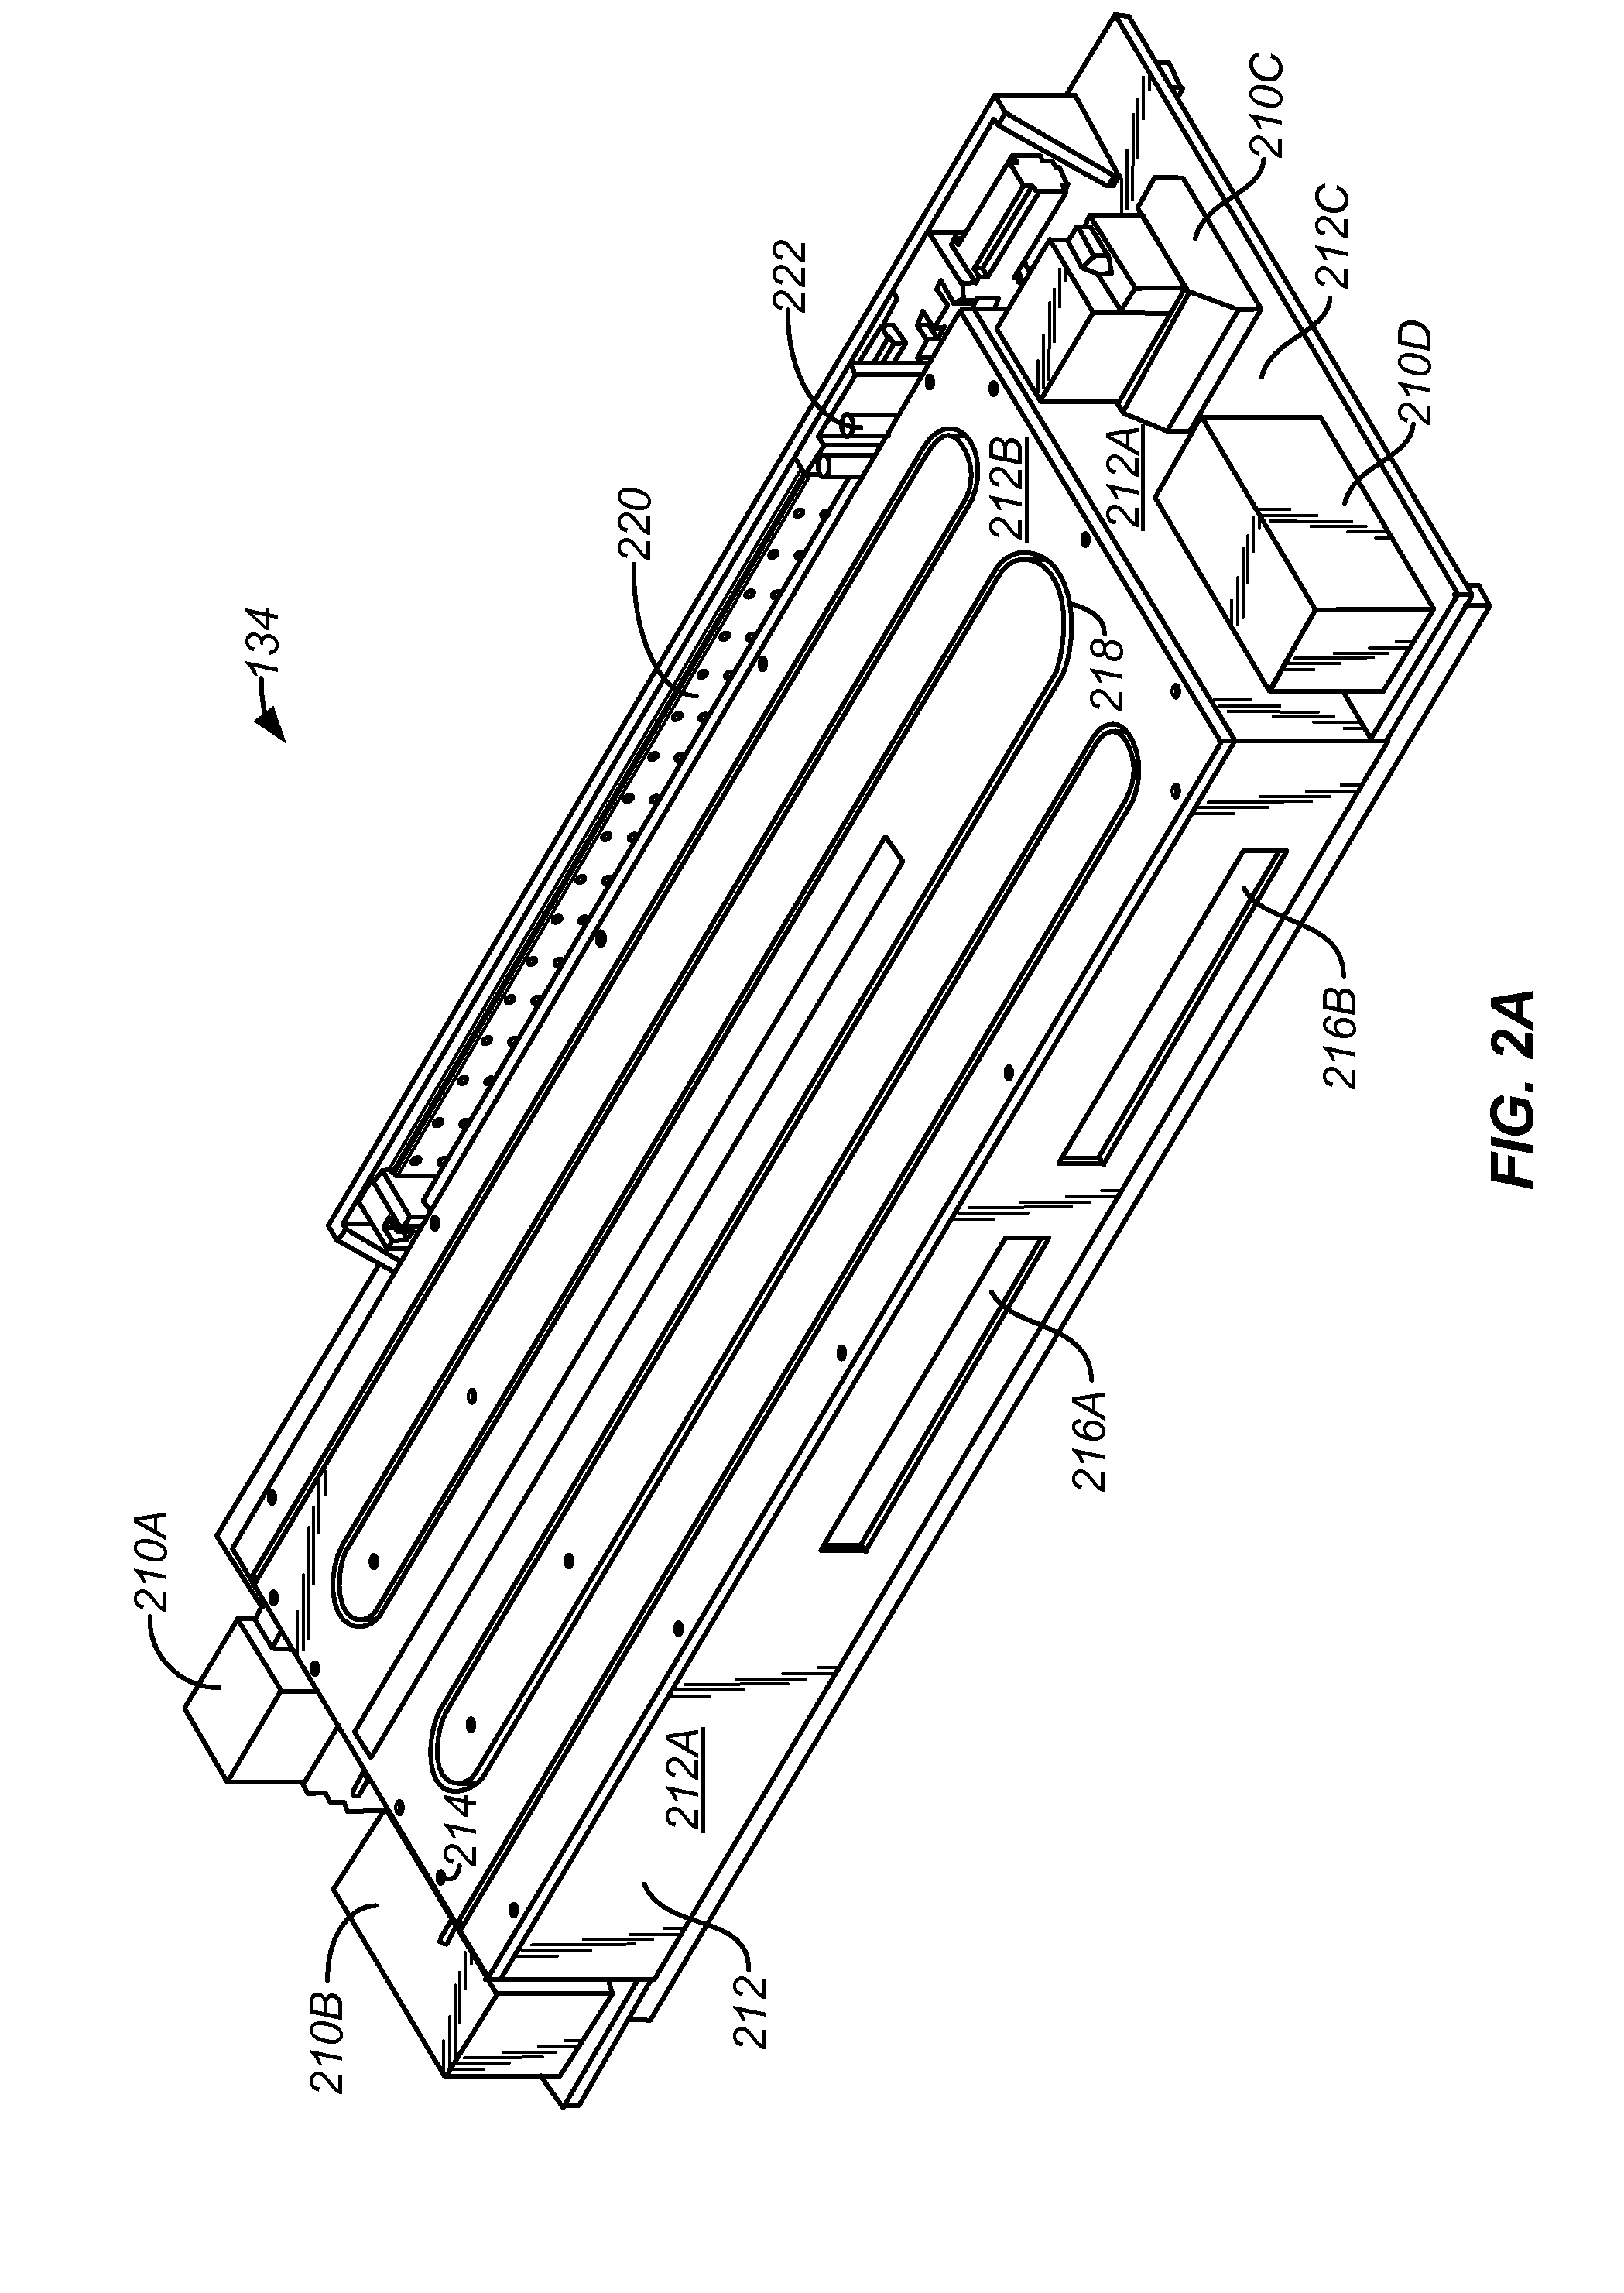 Method and System for Cooling a Bake Plate in a Track Lithography Tool